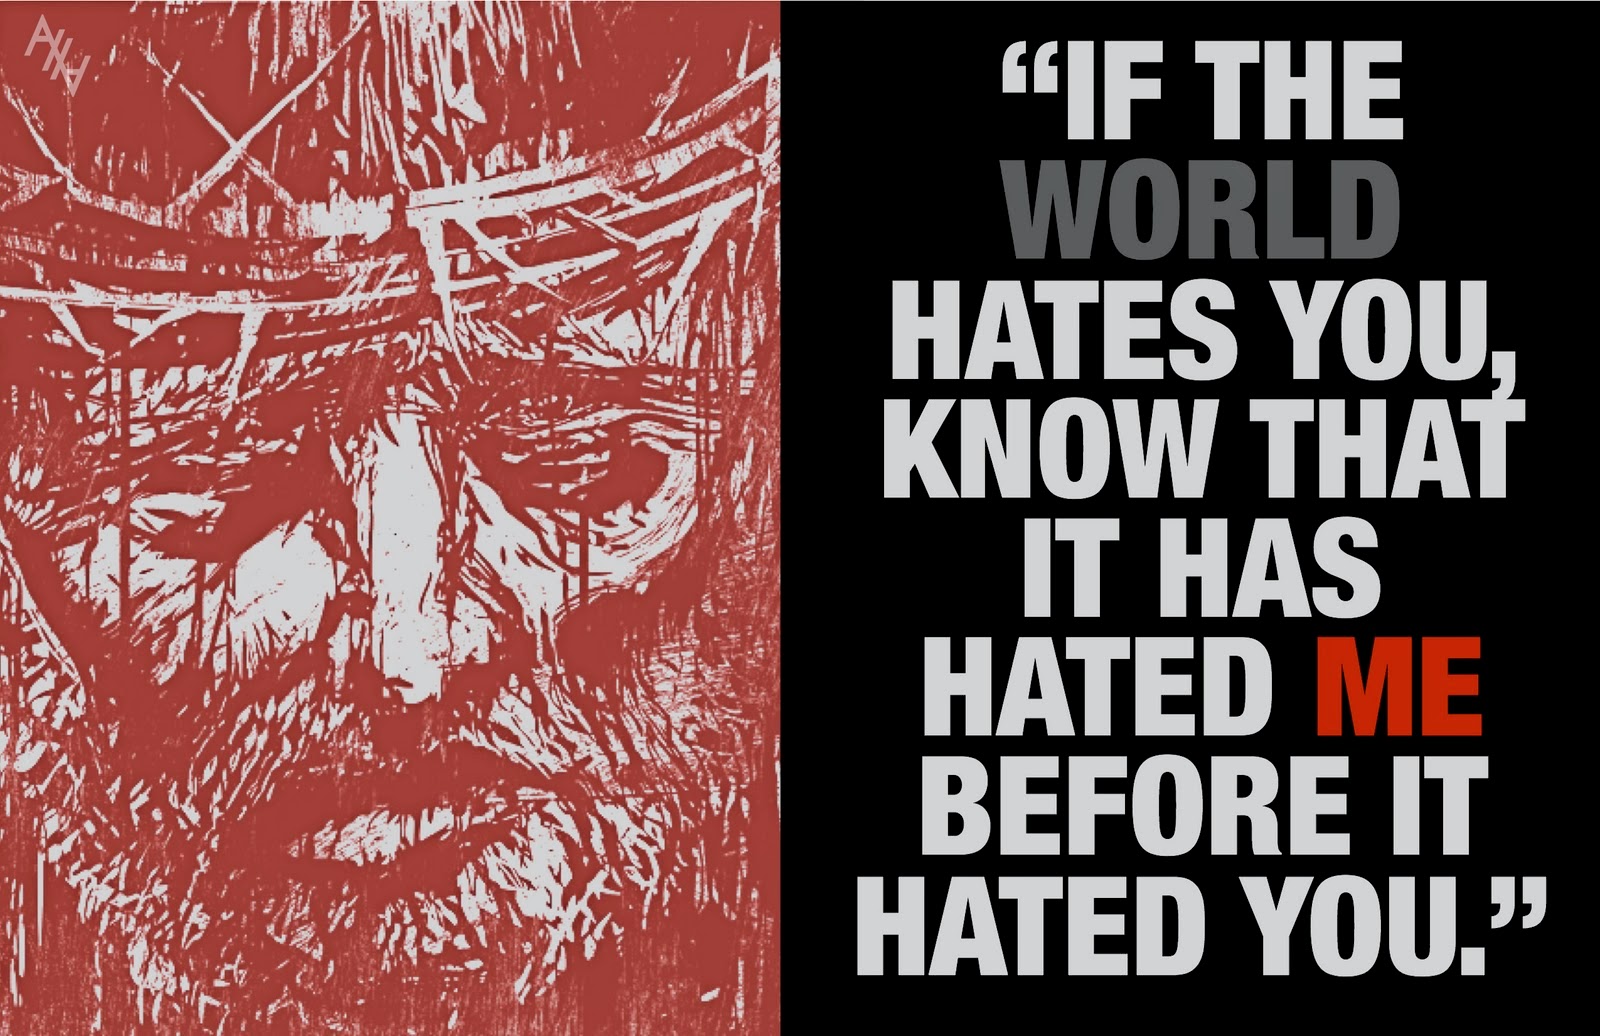 I hate world. If the World hates you. “If the World hates you, know that it has hated me before it hated you.. If the World hates you, just remember that it hated me first.. If the World hates you remember that it hated me first перевод.